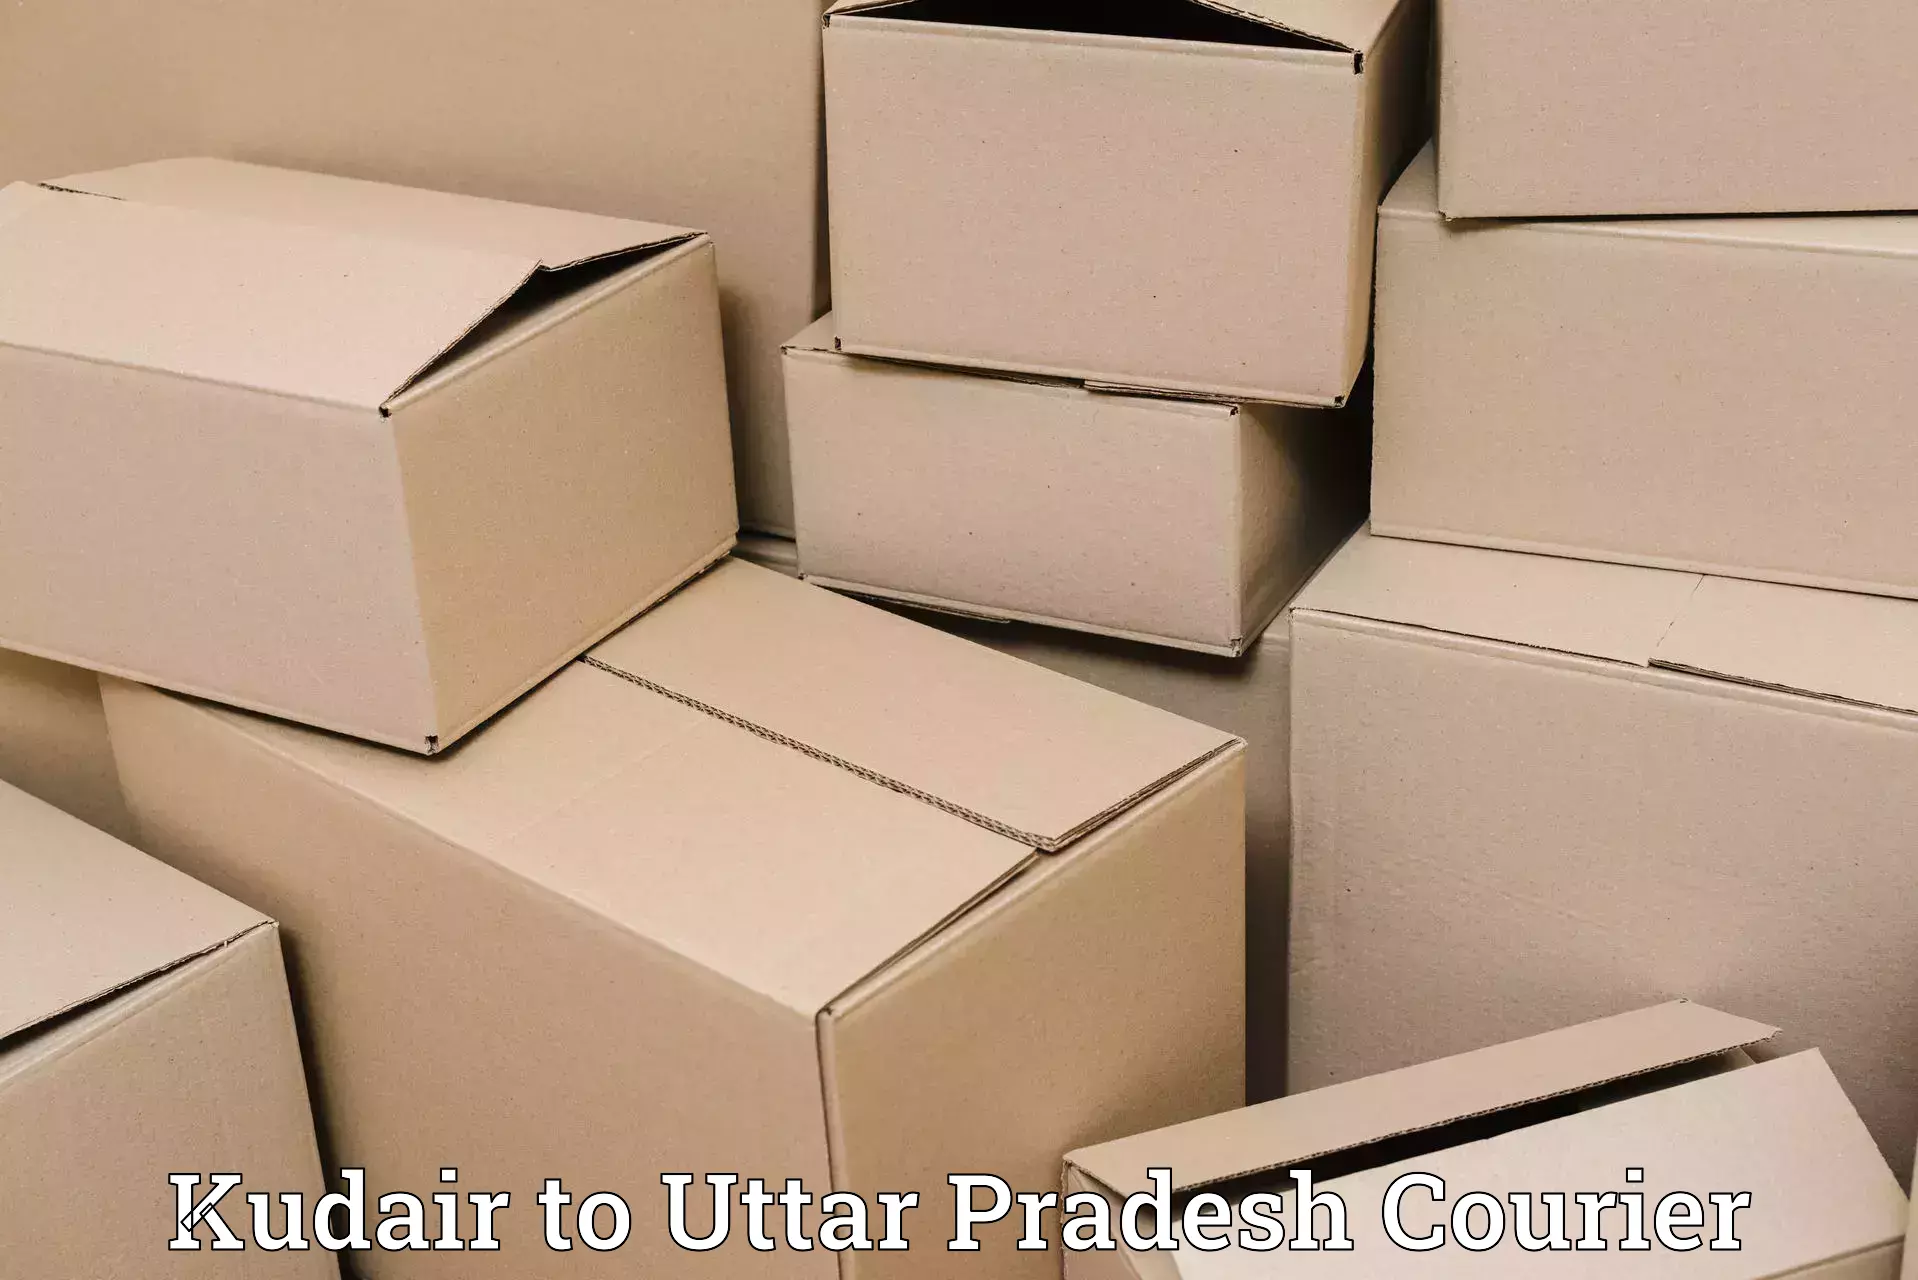 Full-service courier options Kudair to Afzalgarh